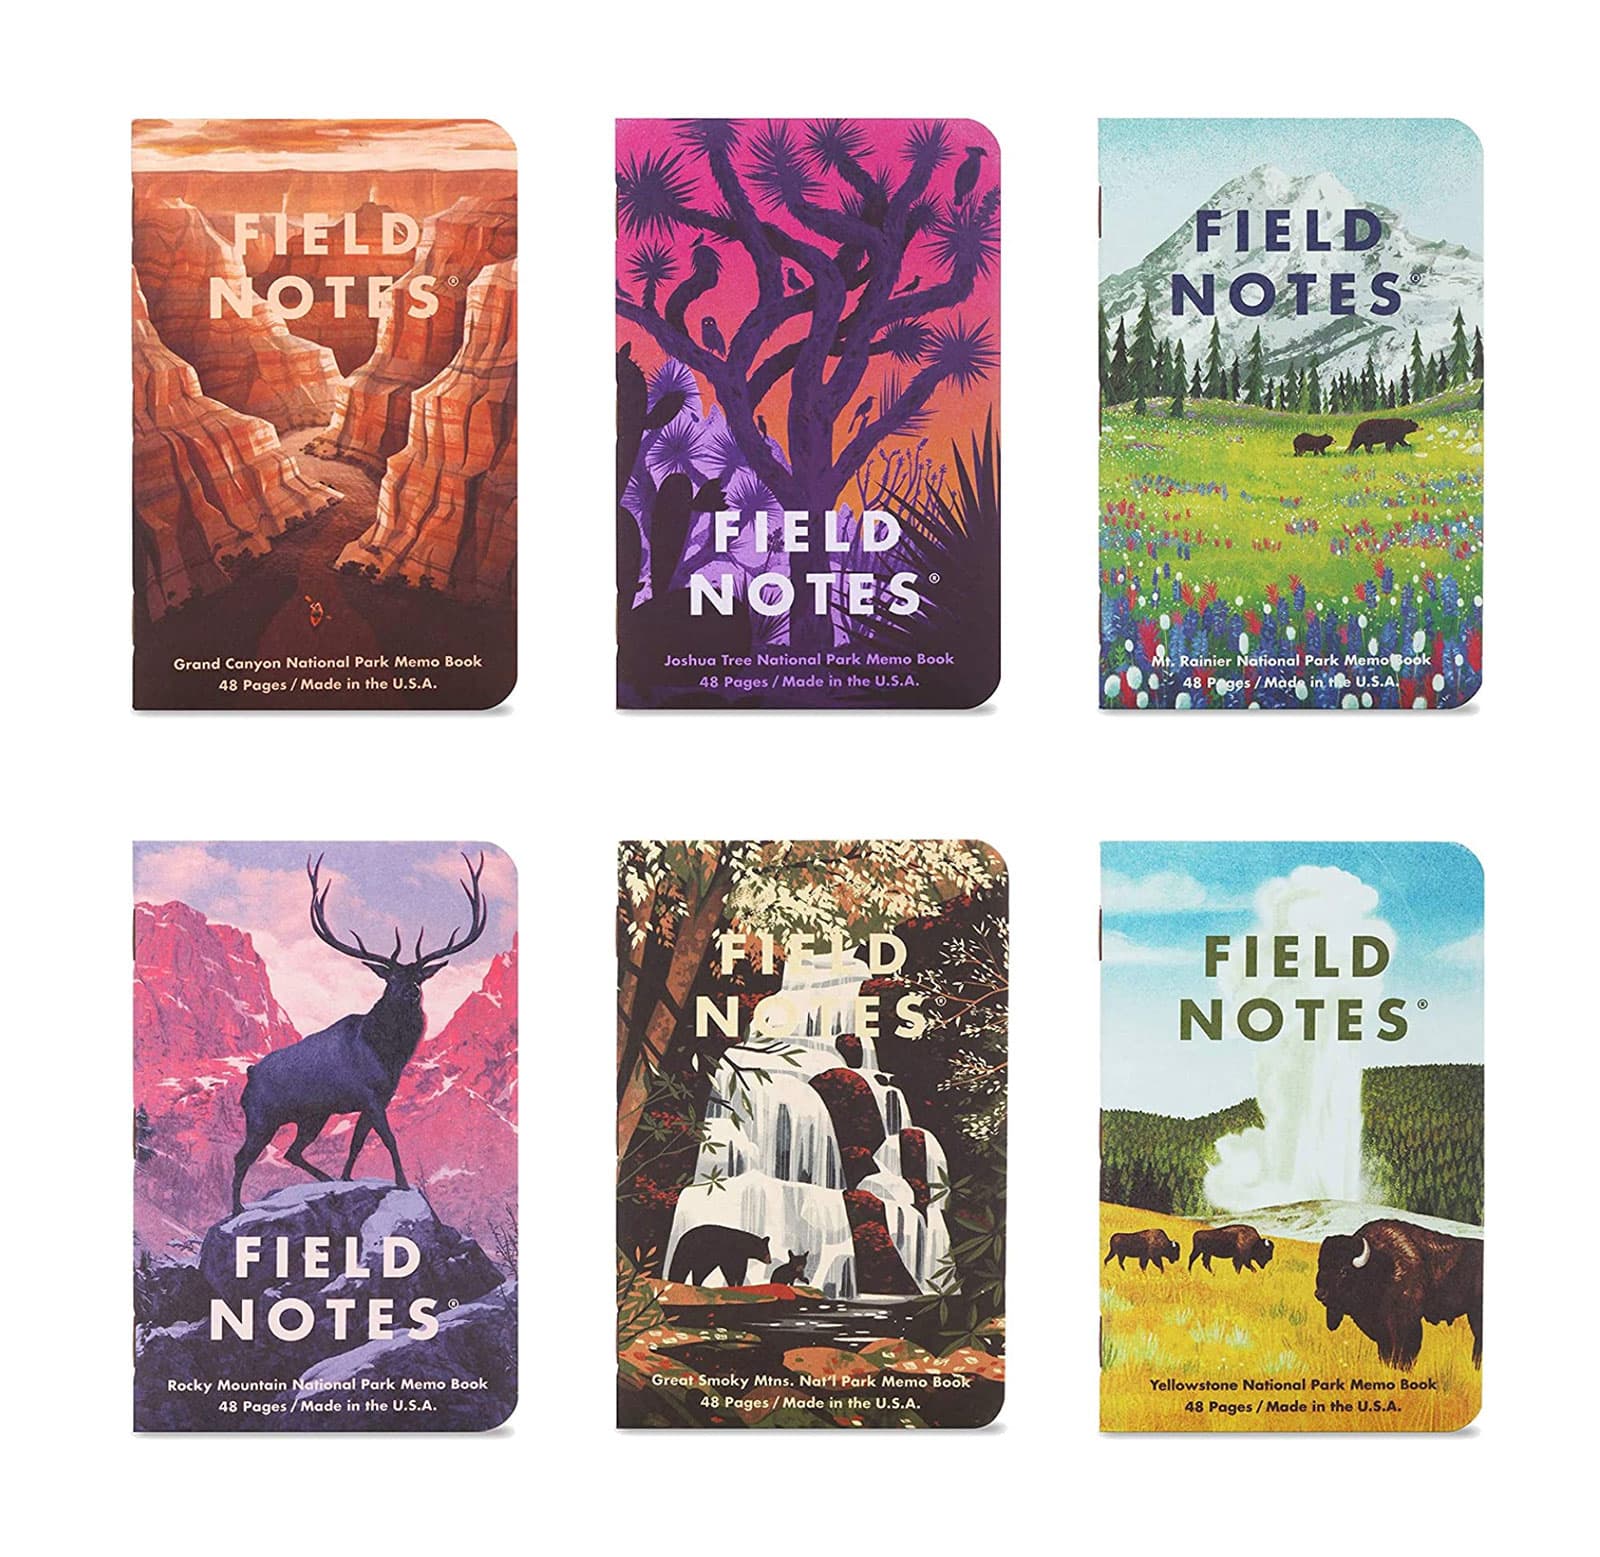 Field Notes memo books featuring national parks